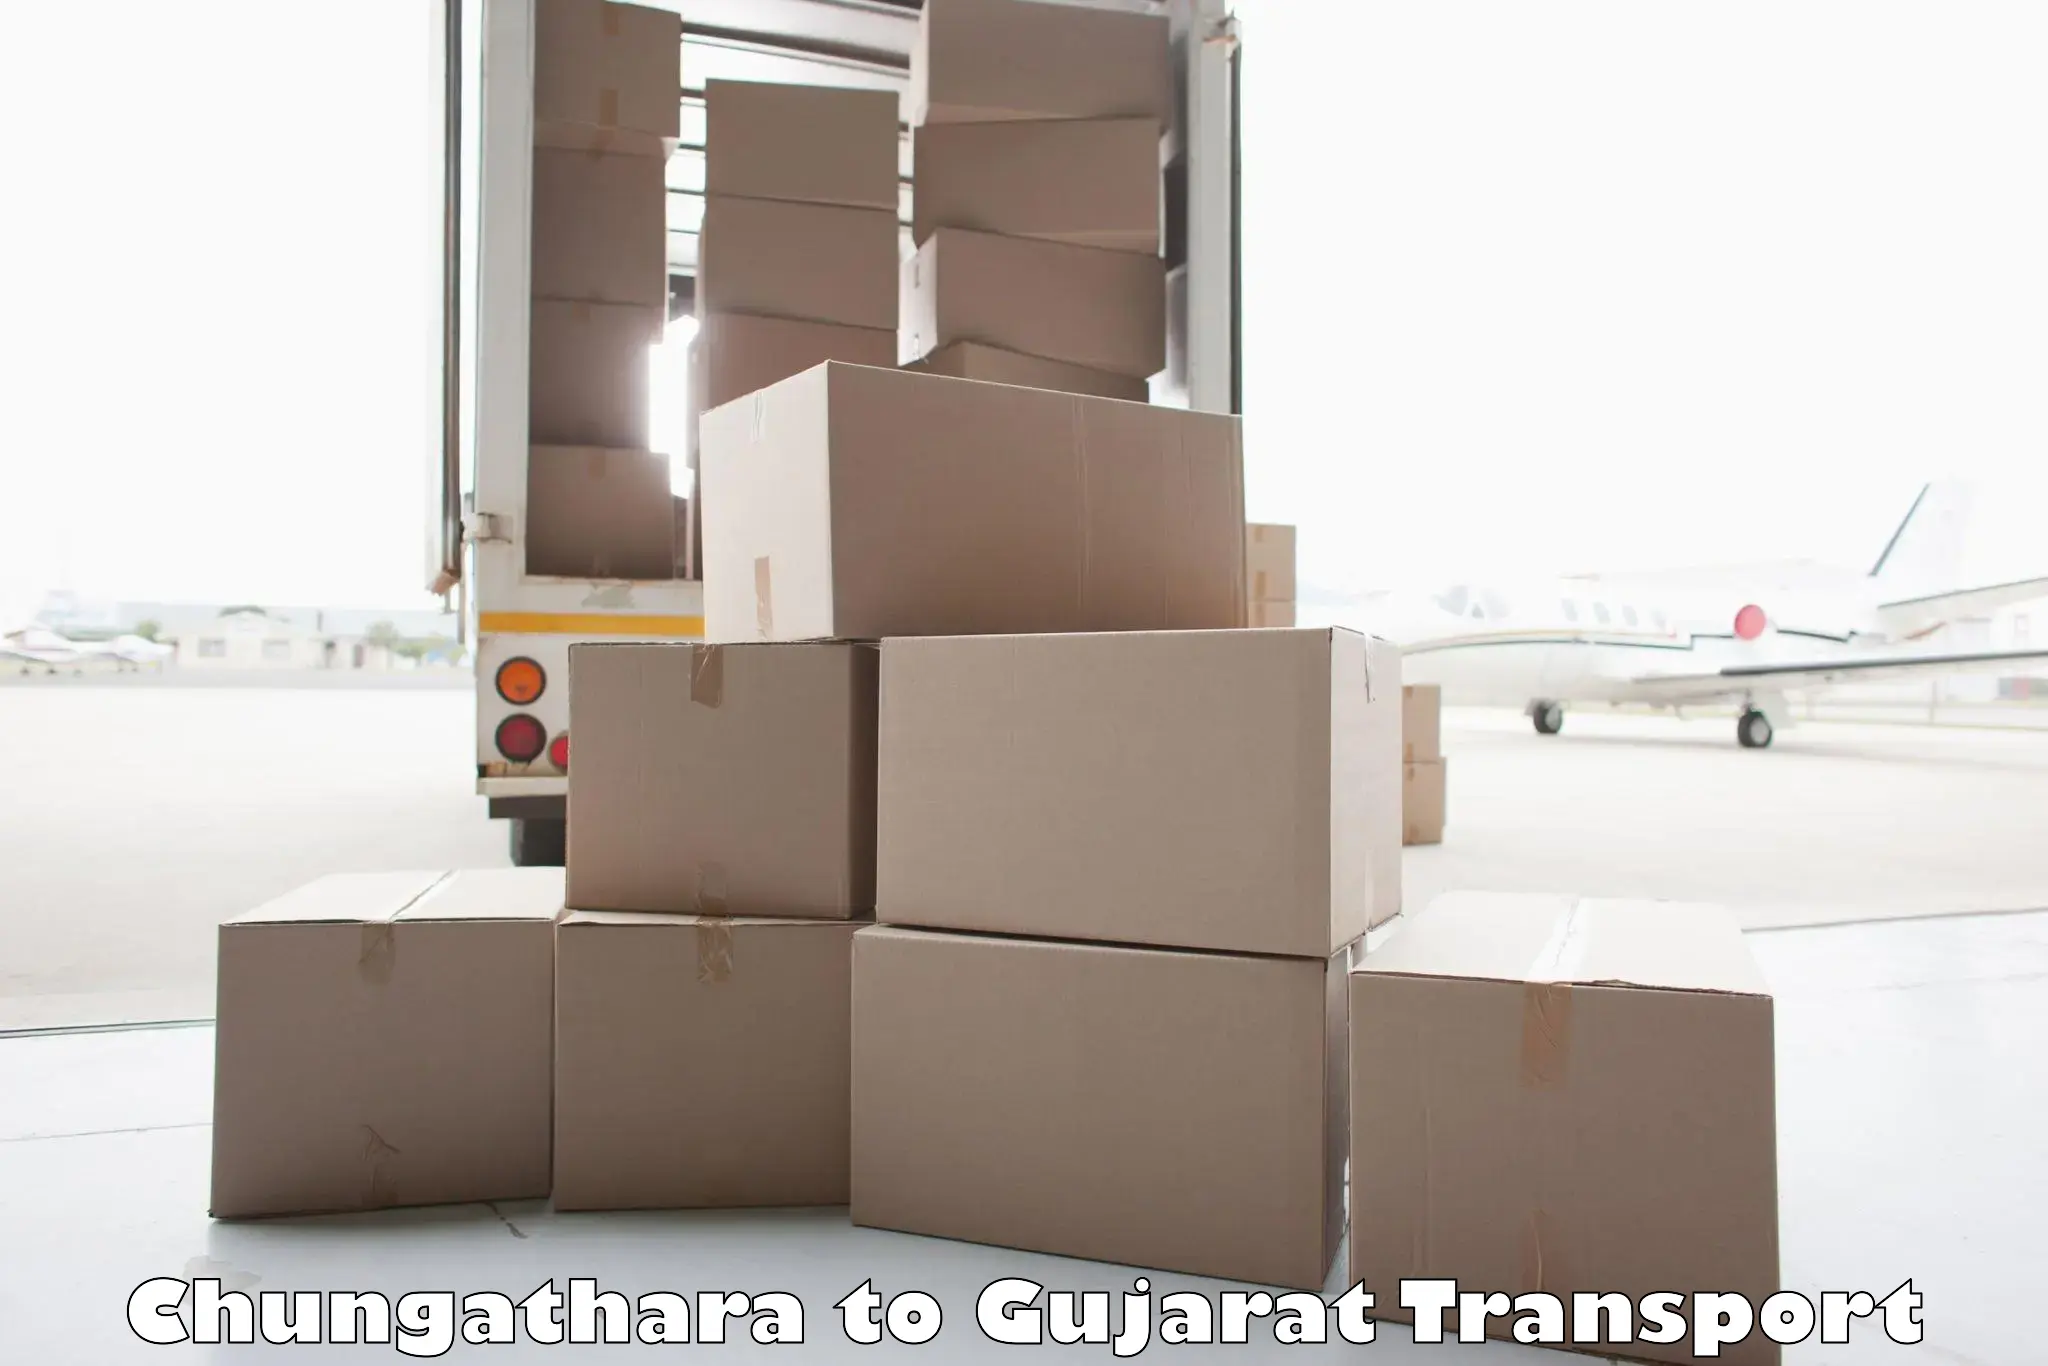 Two wheeler transport services Chungathara to Kachchh